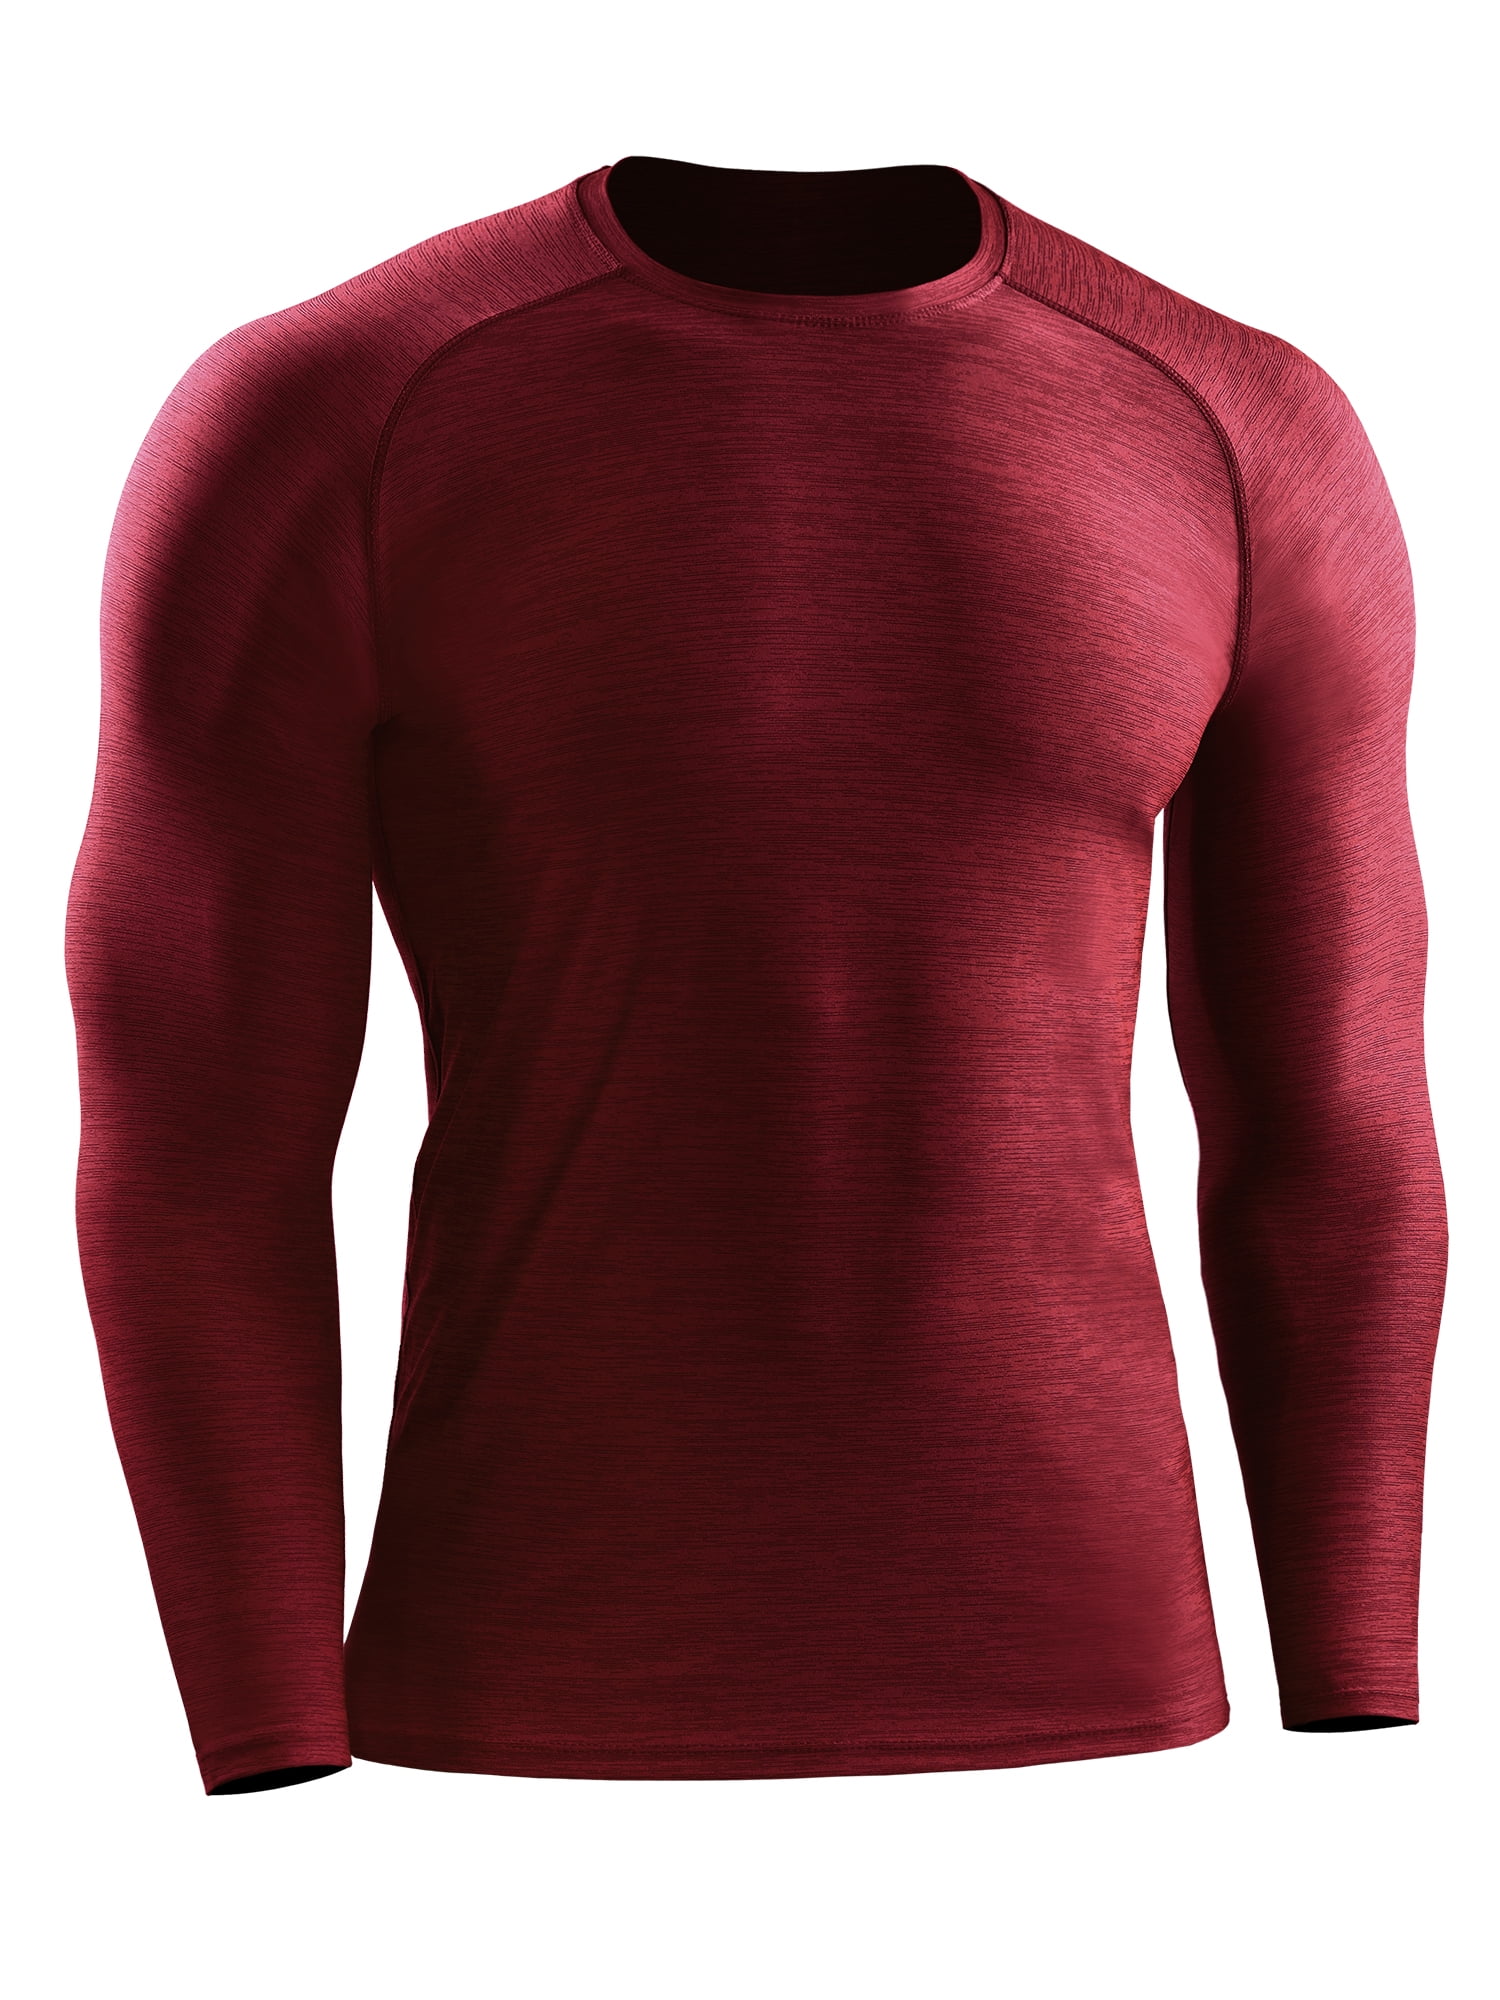 Men Compression T Shirt Under Thermal  Base Layer Sports Long Sleeve Fiitness 